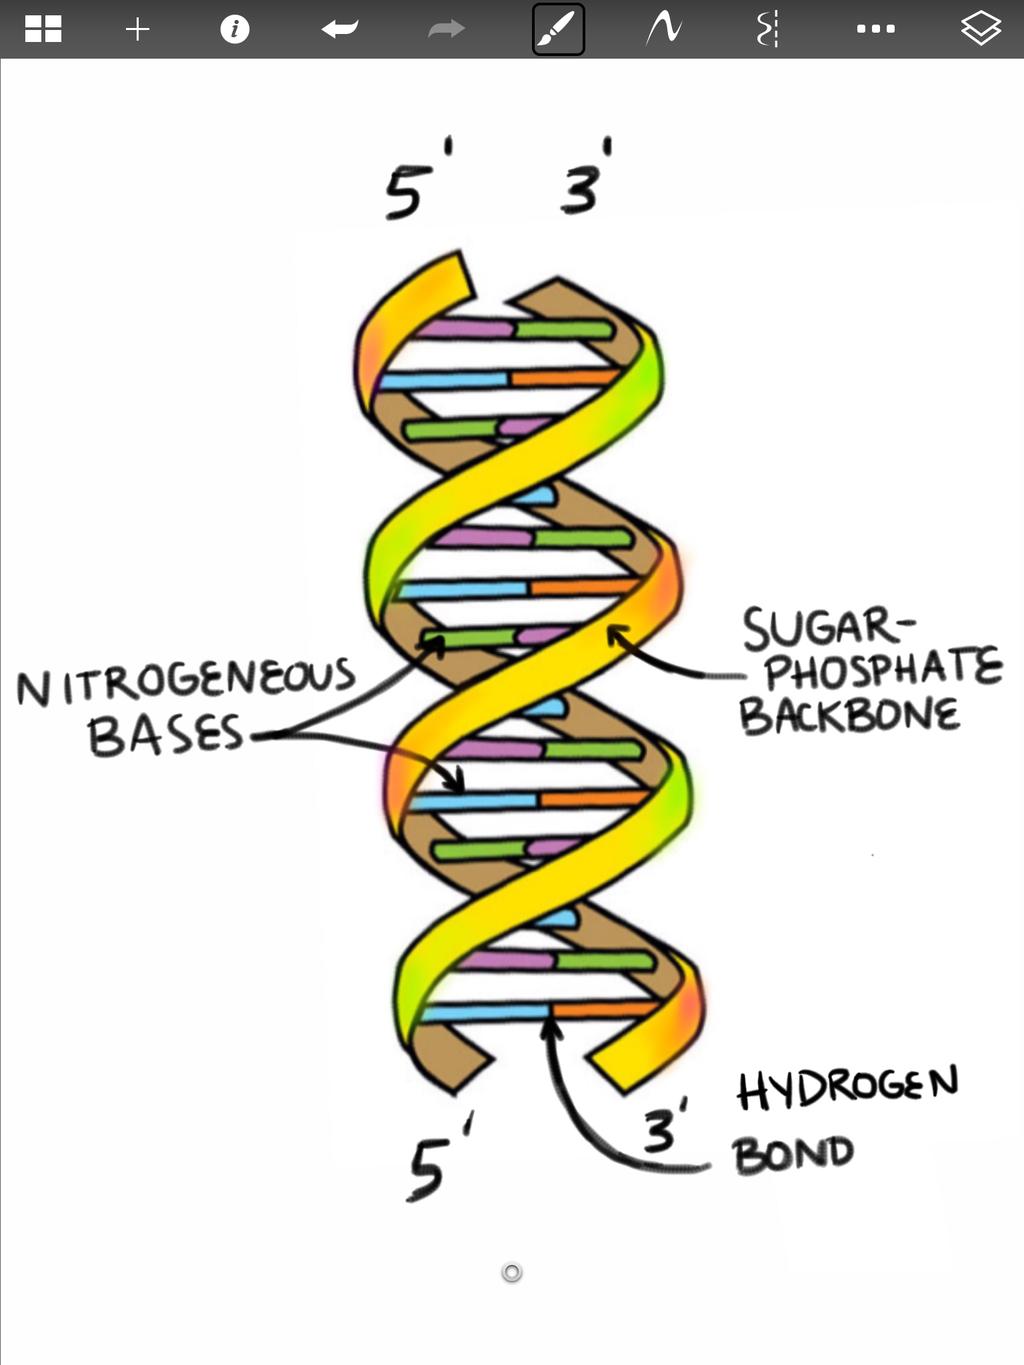 complementary- each is the predictable counterpart of the other 1 strand shape = variable depending on type (mrna, trna, rrna) A, U, C, G adenine always